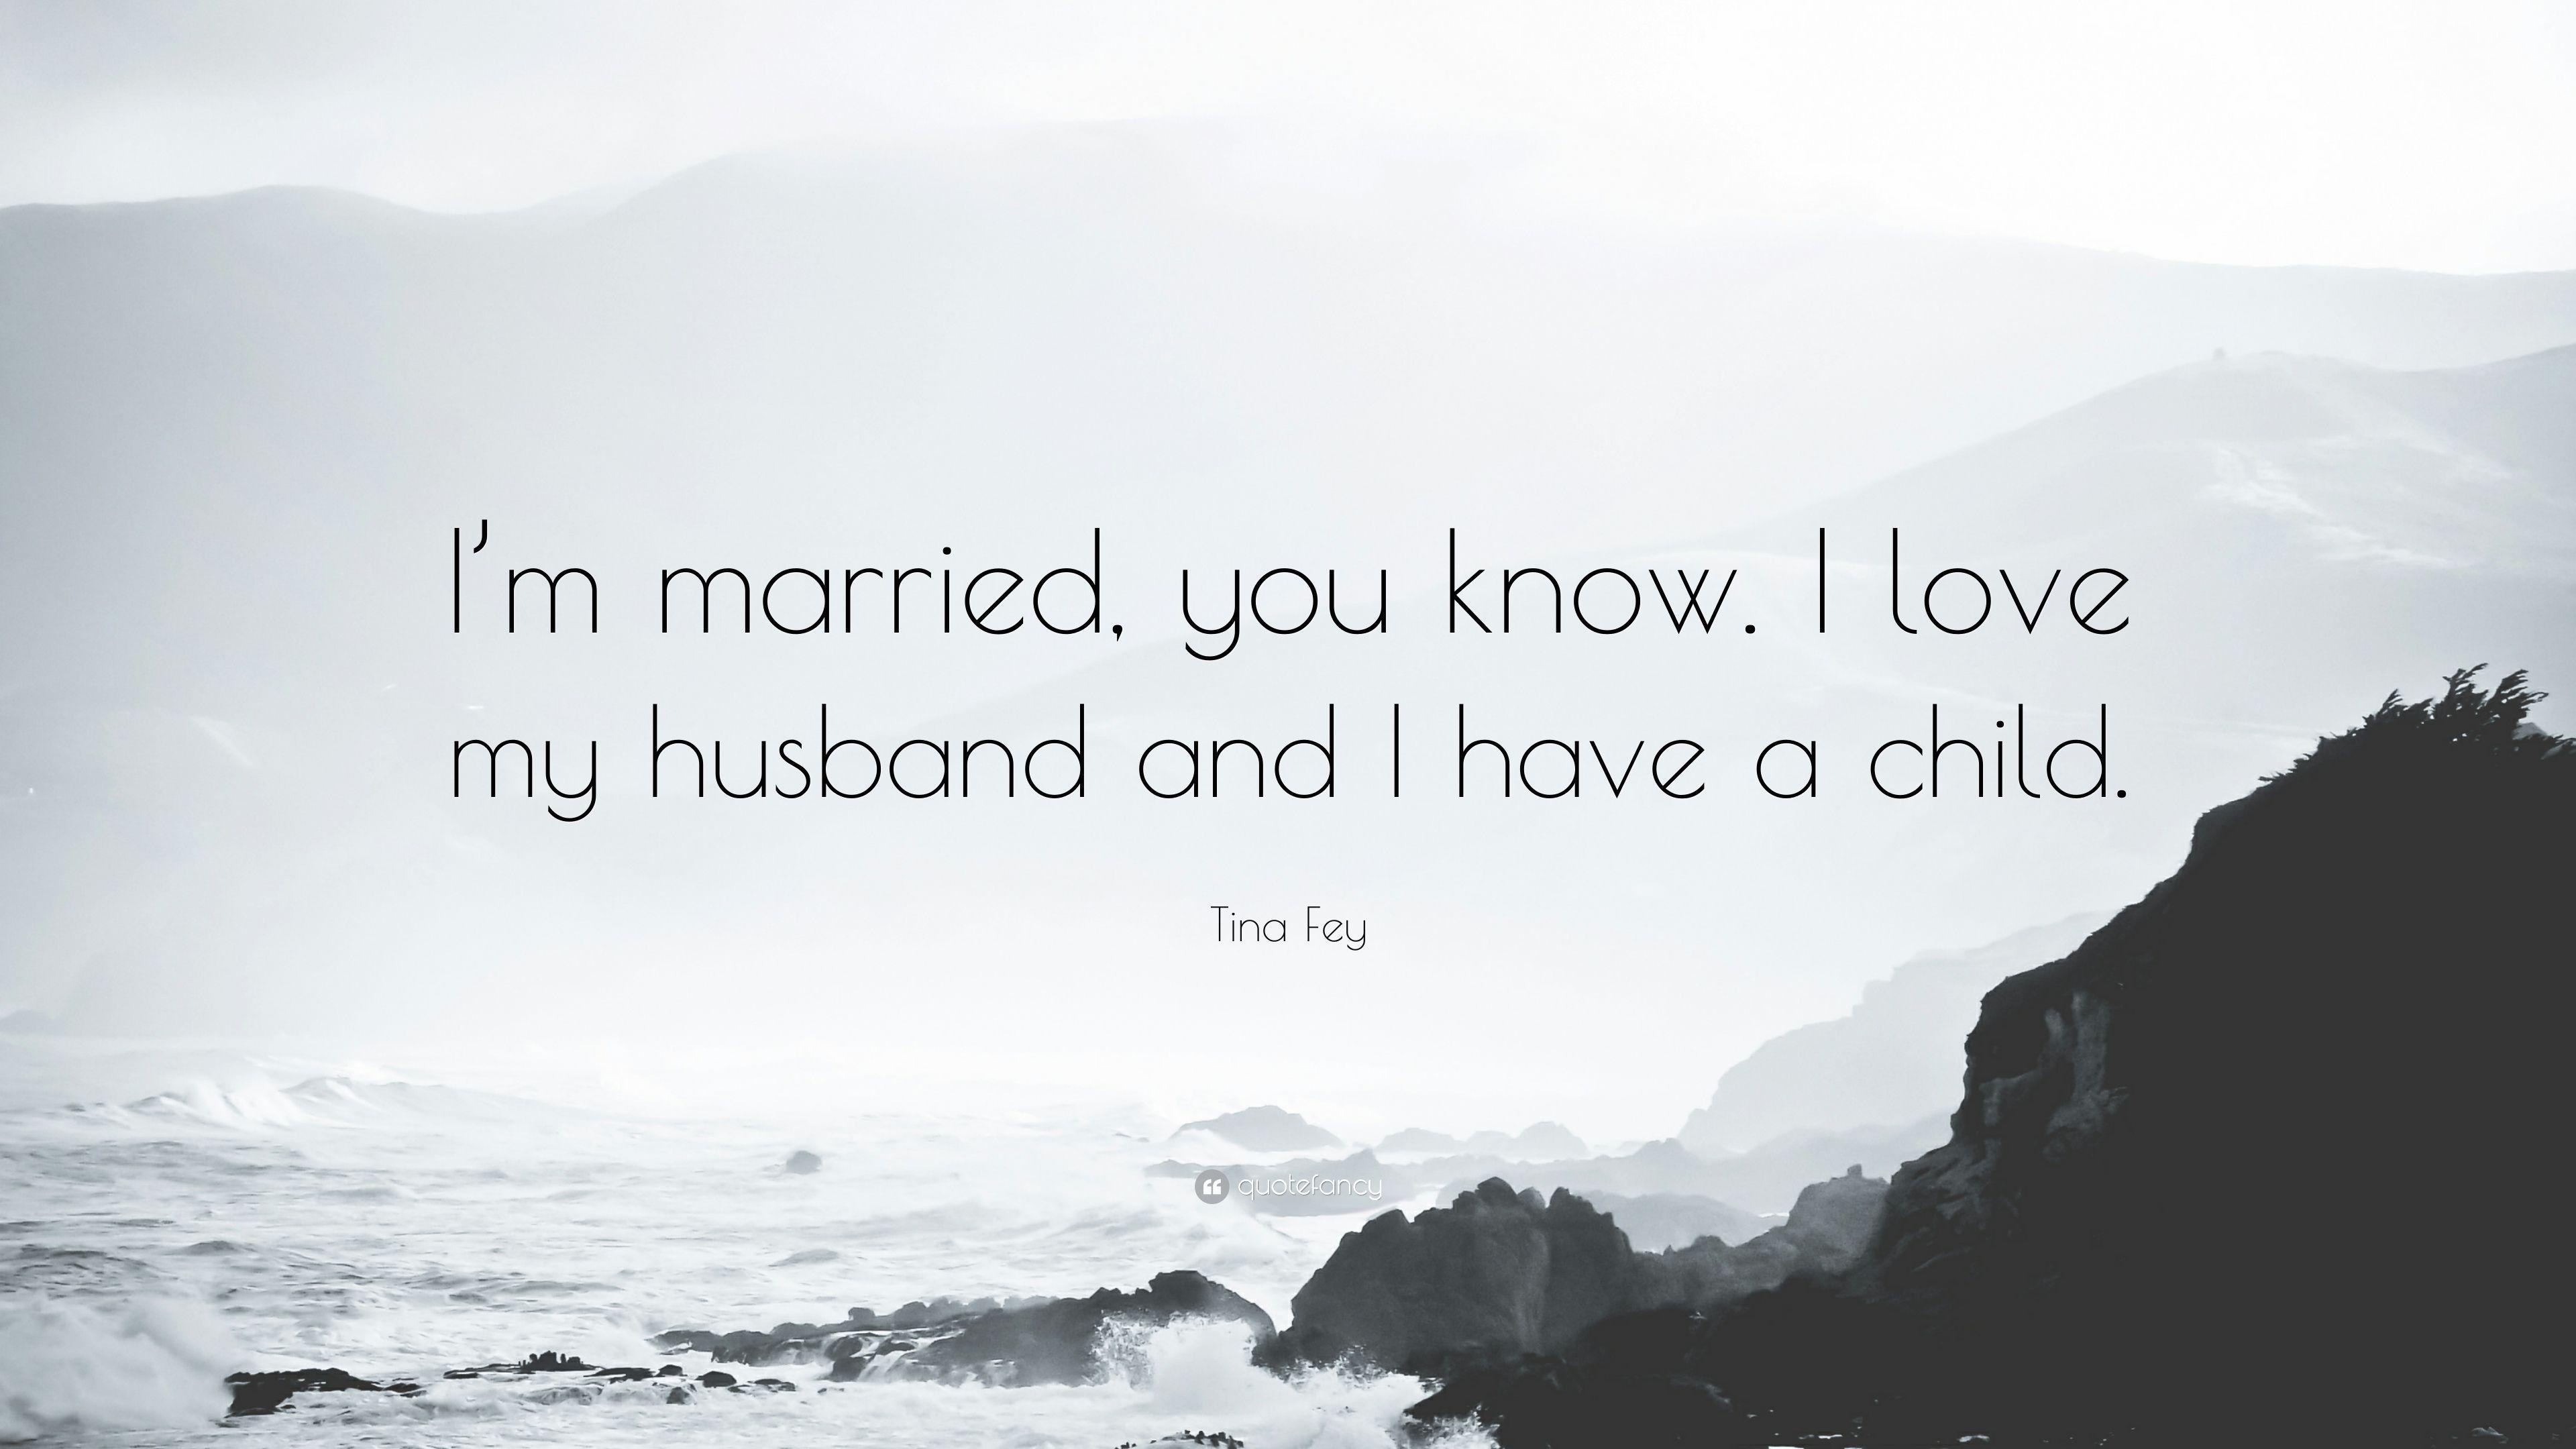 Tina Fey Quote: “I&;m married, you know. I love my husband and I